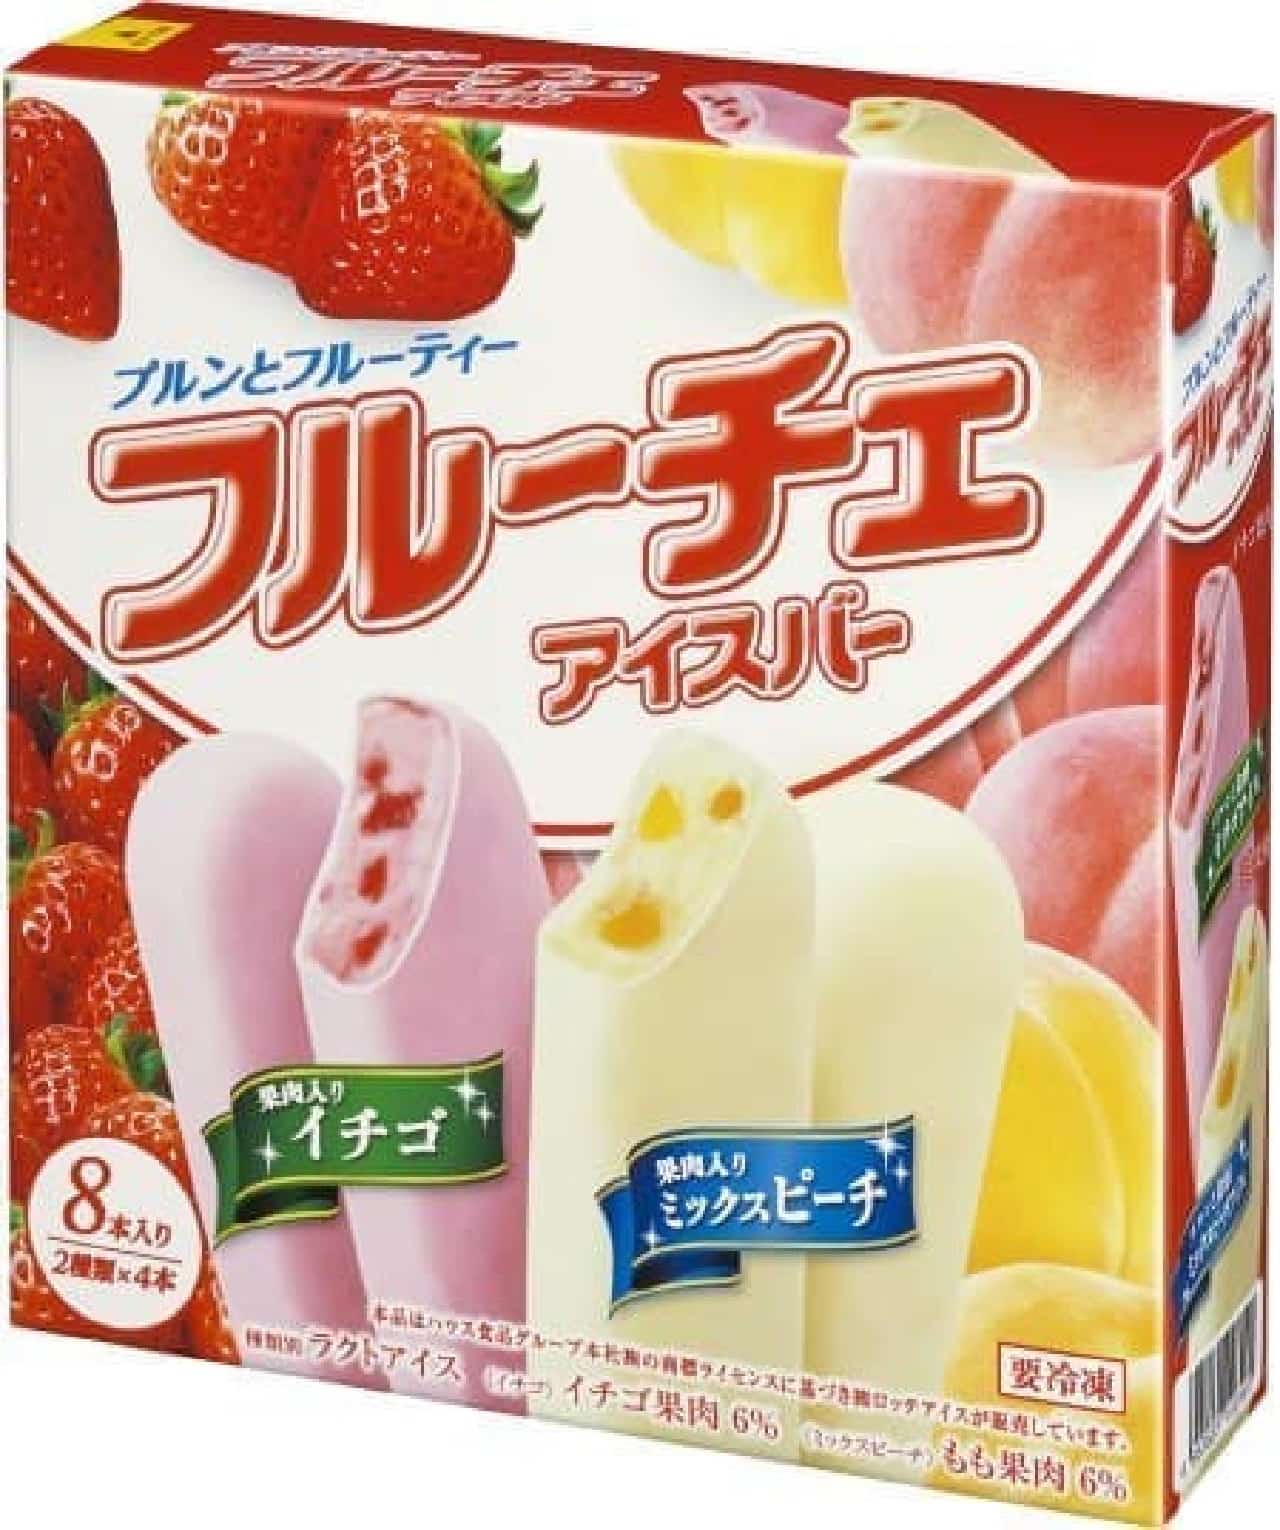 Prun and fruity Fruche are now ice cream!